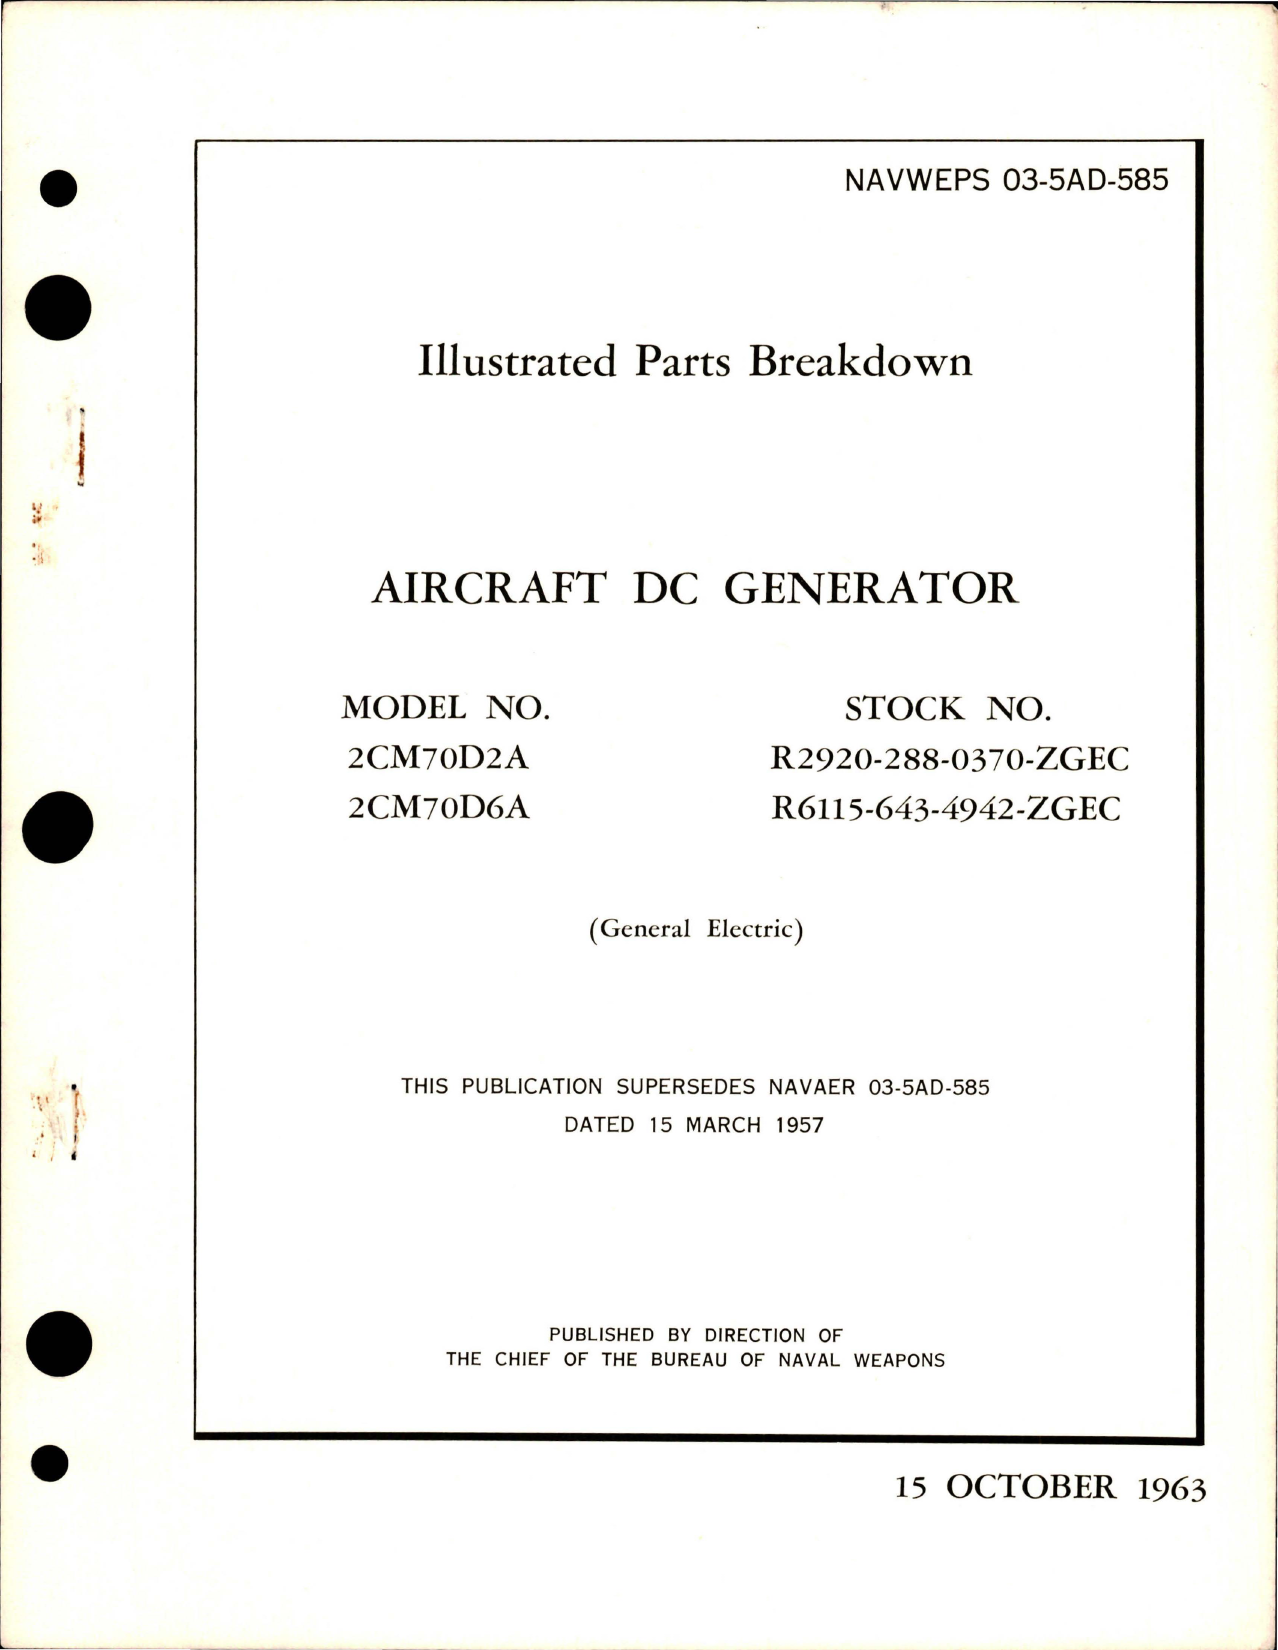 Sample page 1 from AirCorps Library document: Illustrated Parts Breakdown for DC Generator - Model 2CM70D2A and 2CM70D6A 